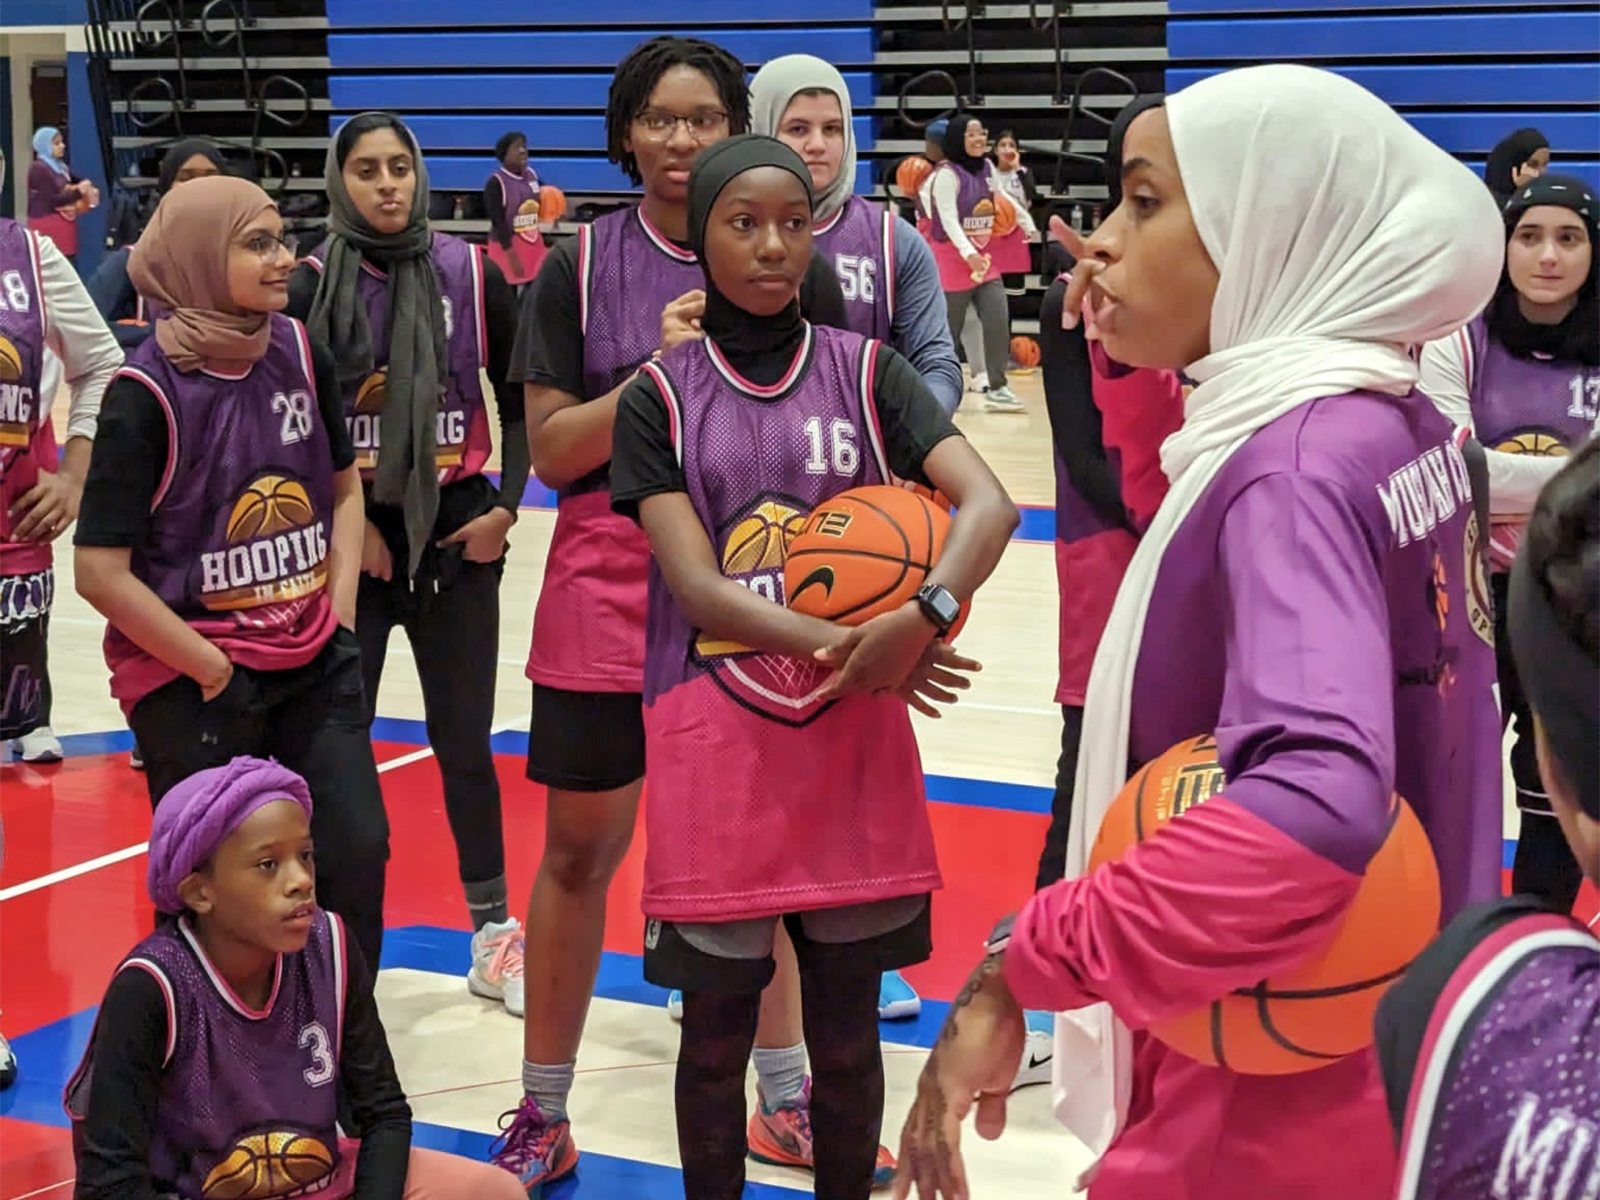 Bilqis Abdul-Qaadir, right, talks to players during a Hooping in Faith basketball program in July 2023 in Memphis, Tenn. Photo by Fathima Darboe